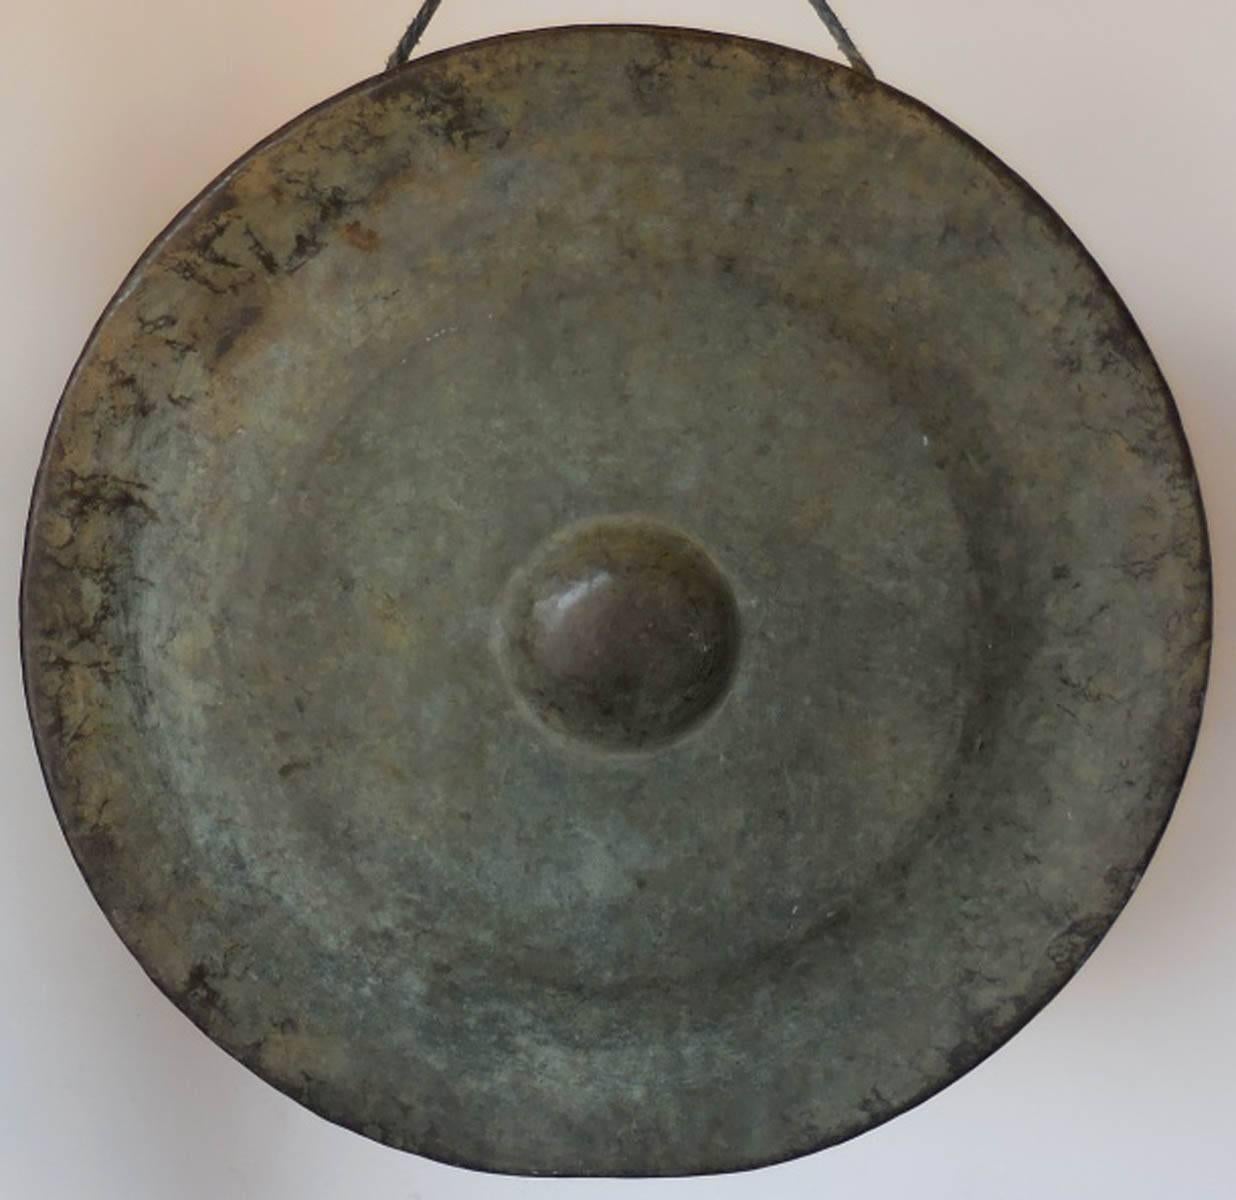 19th century Japanese solid bronze temple gong with striker. Simple design, beautiful sound. Lovely color variations of dusty of green, bronze patina. Wear consistent with use.